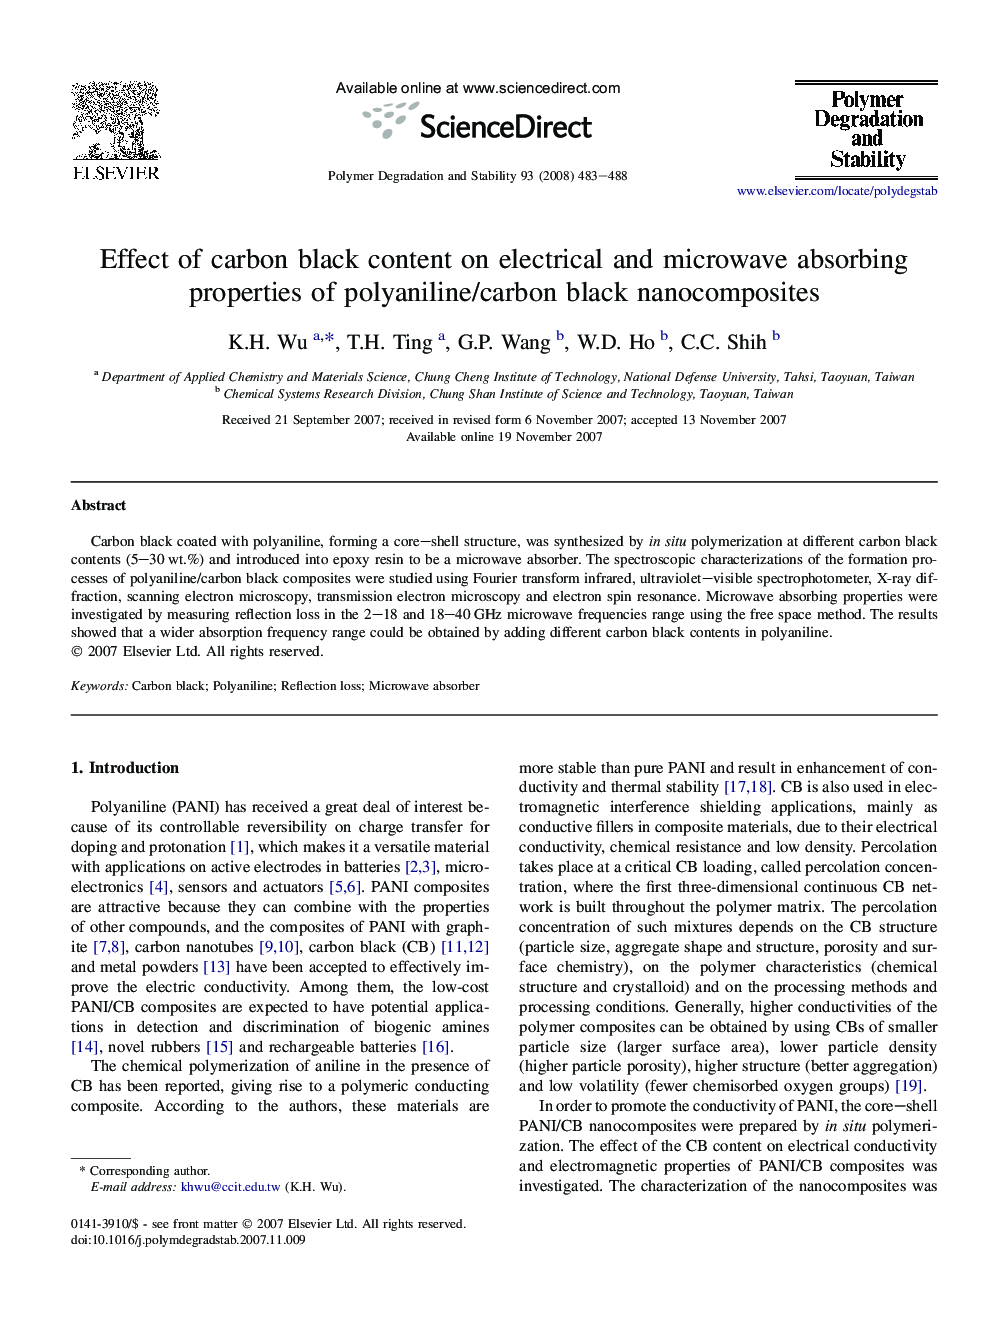 Effect of carbon black content on electrical and microwave absorbing properties of polyaniline/carbon black nanocomposites